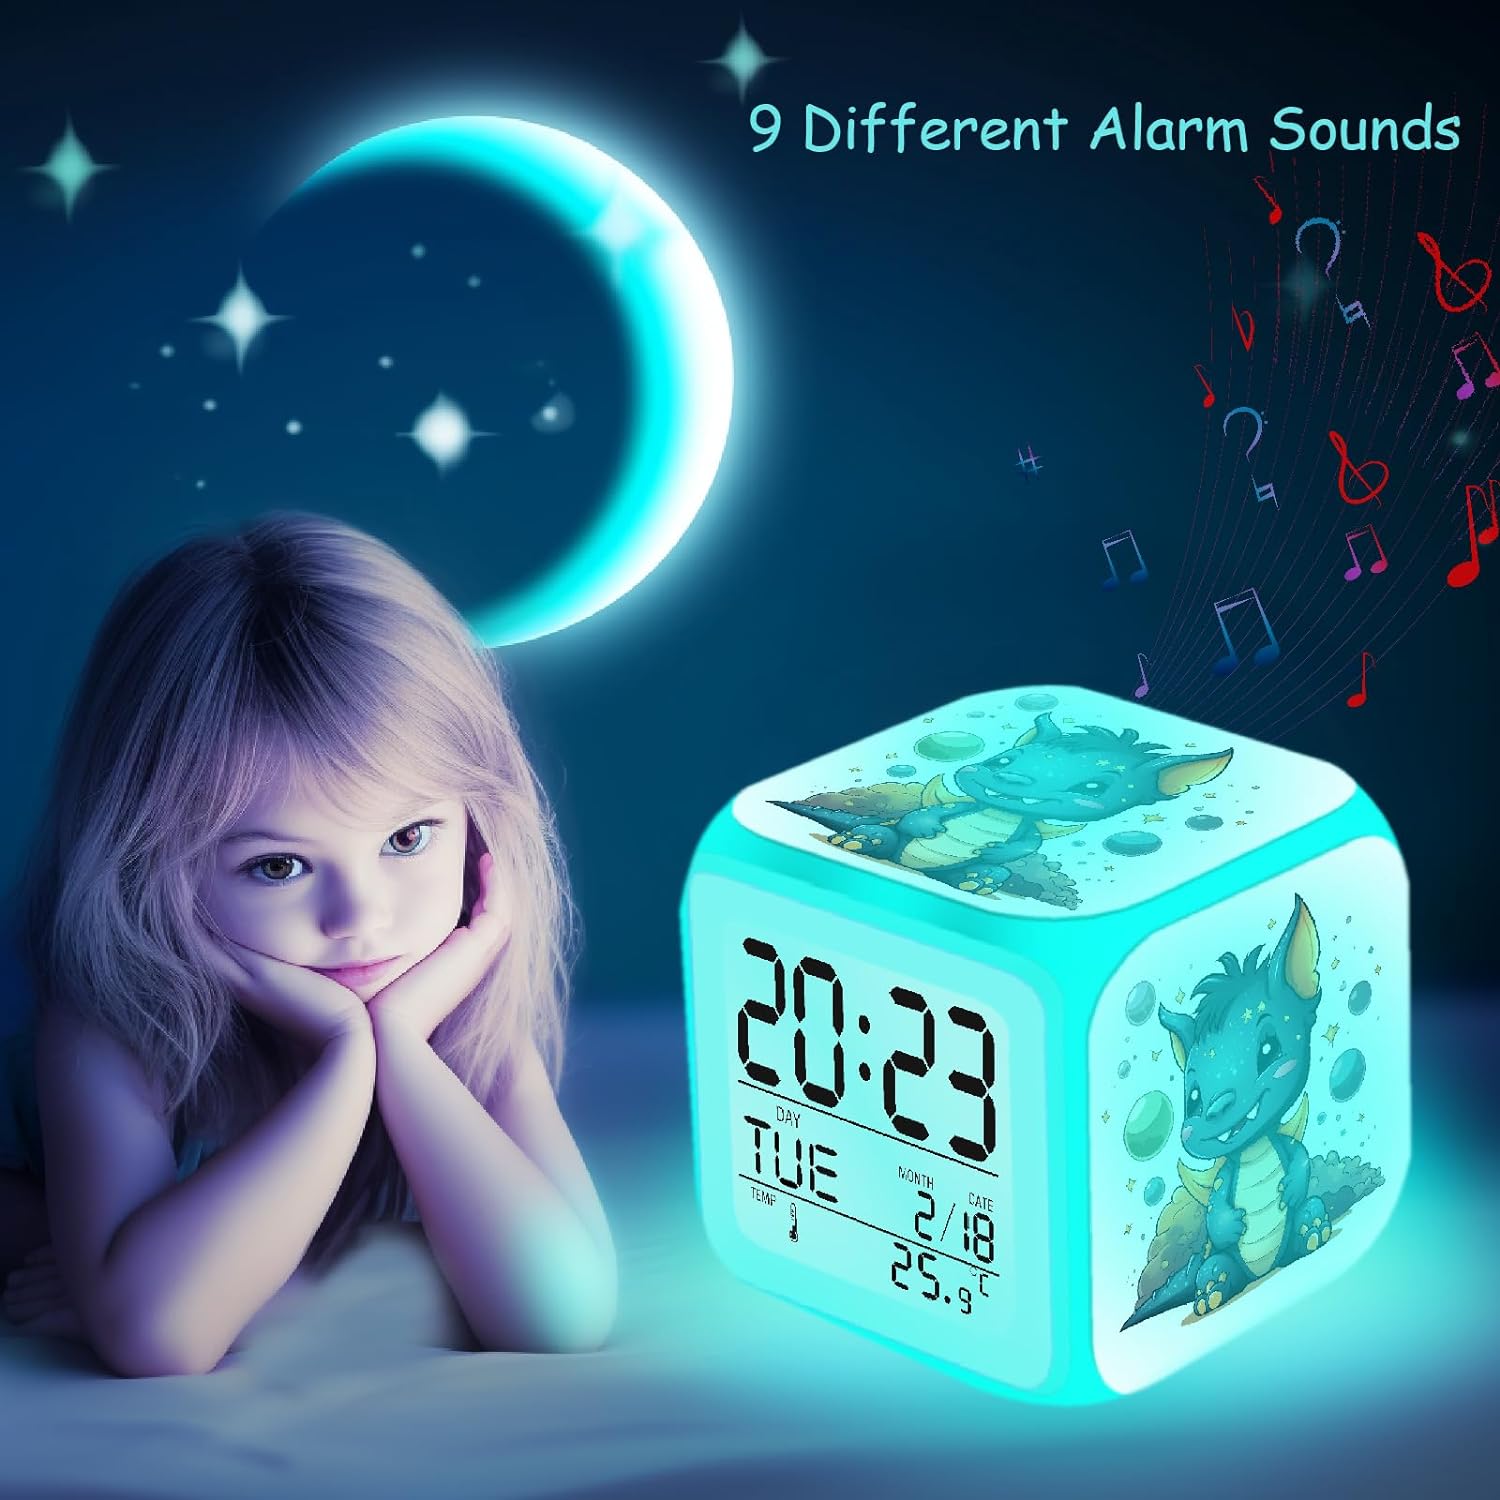 ZonleeApex Kids Digital Alarm Clock with Dragon for Boys Girls Ages 6-13, Cute Cube Introductory Alarm Clock with Night Light for Bedroom Decor Gift Ideas (3.15x3.15x3.15inch)